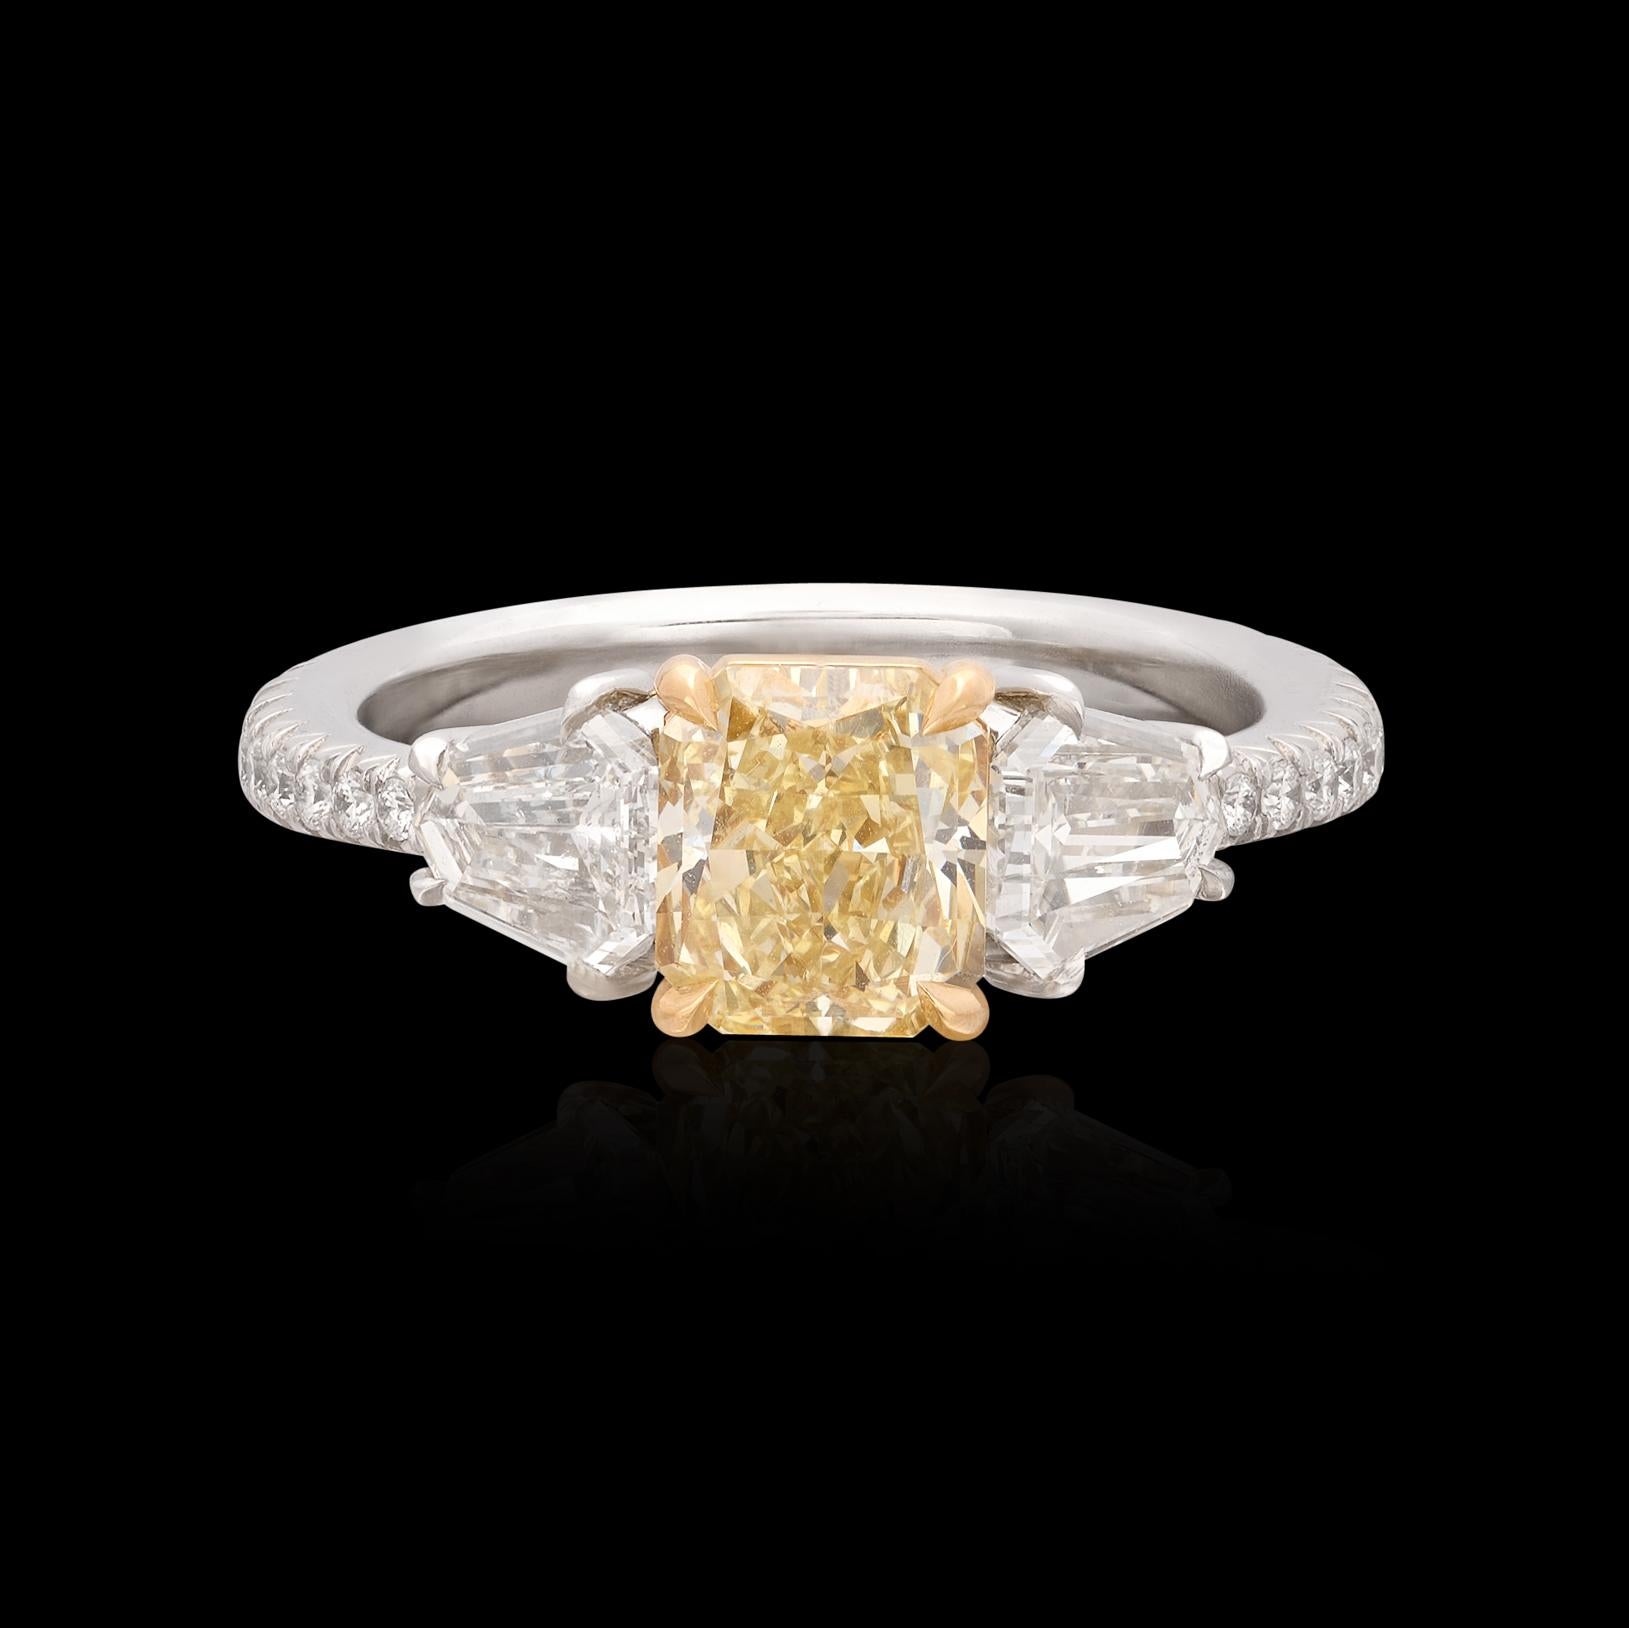 A yellow diamond stunner that is sure to turn heads! This extraordinary ring features a 1.38 Radiant Cut natural yellow diamond flanked on either side by a phenomenal white Kite Cut diamond along with 20 fine Round Cut diamonds perfectly set 3/4